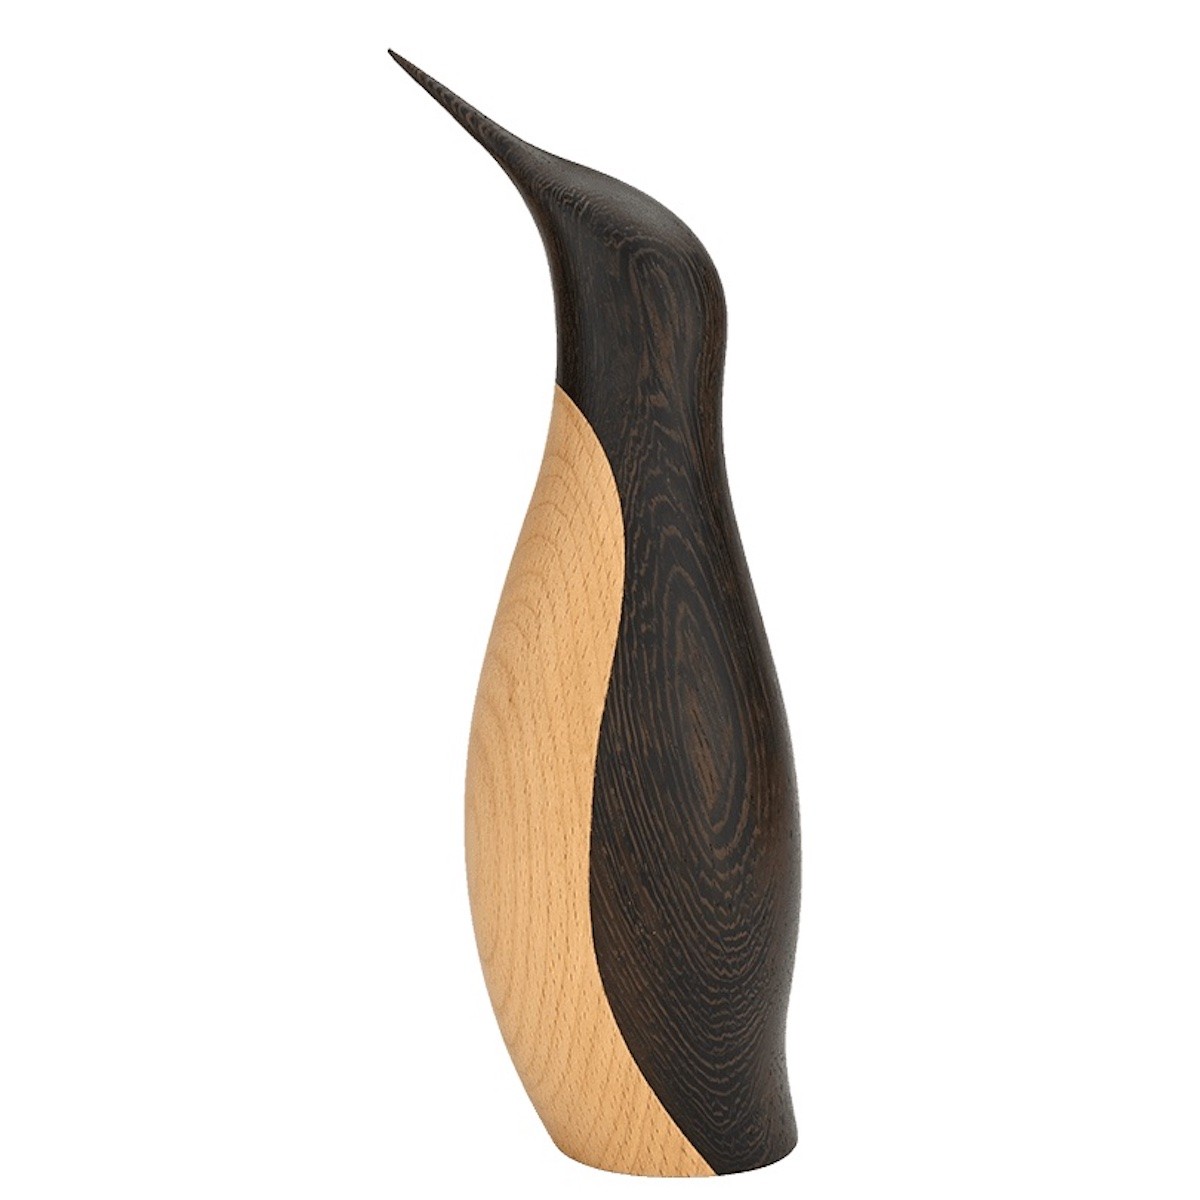 Penguin – H18,20 x 5,90 cm – SMALL - beech and wenge